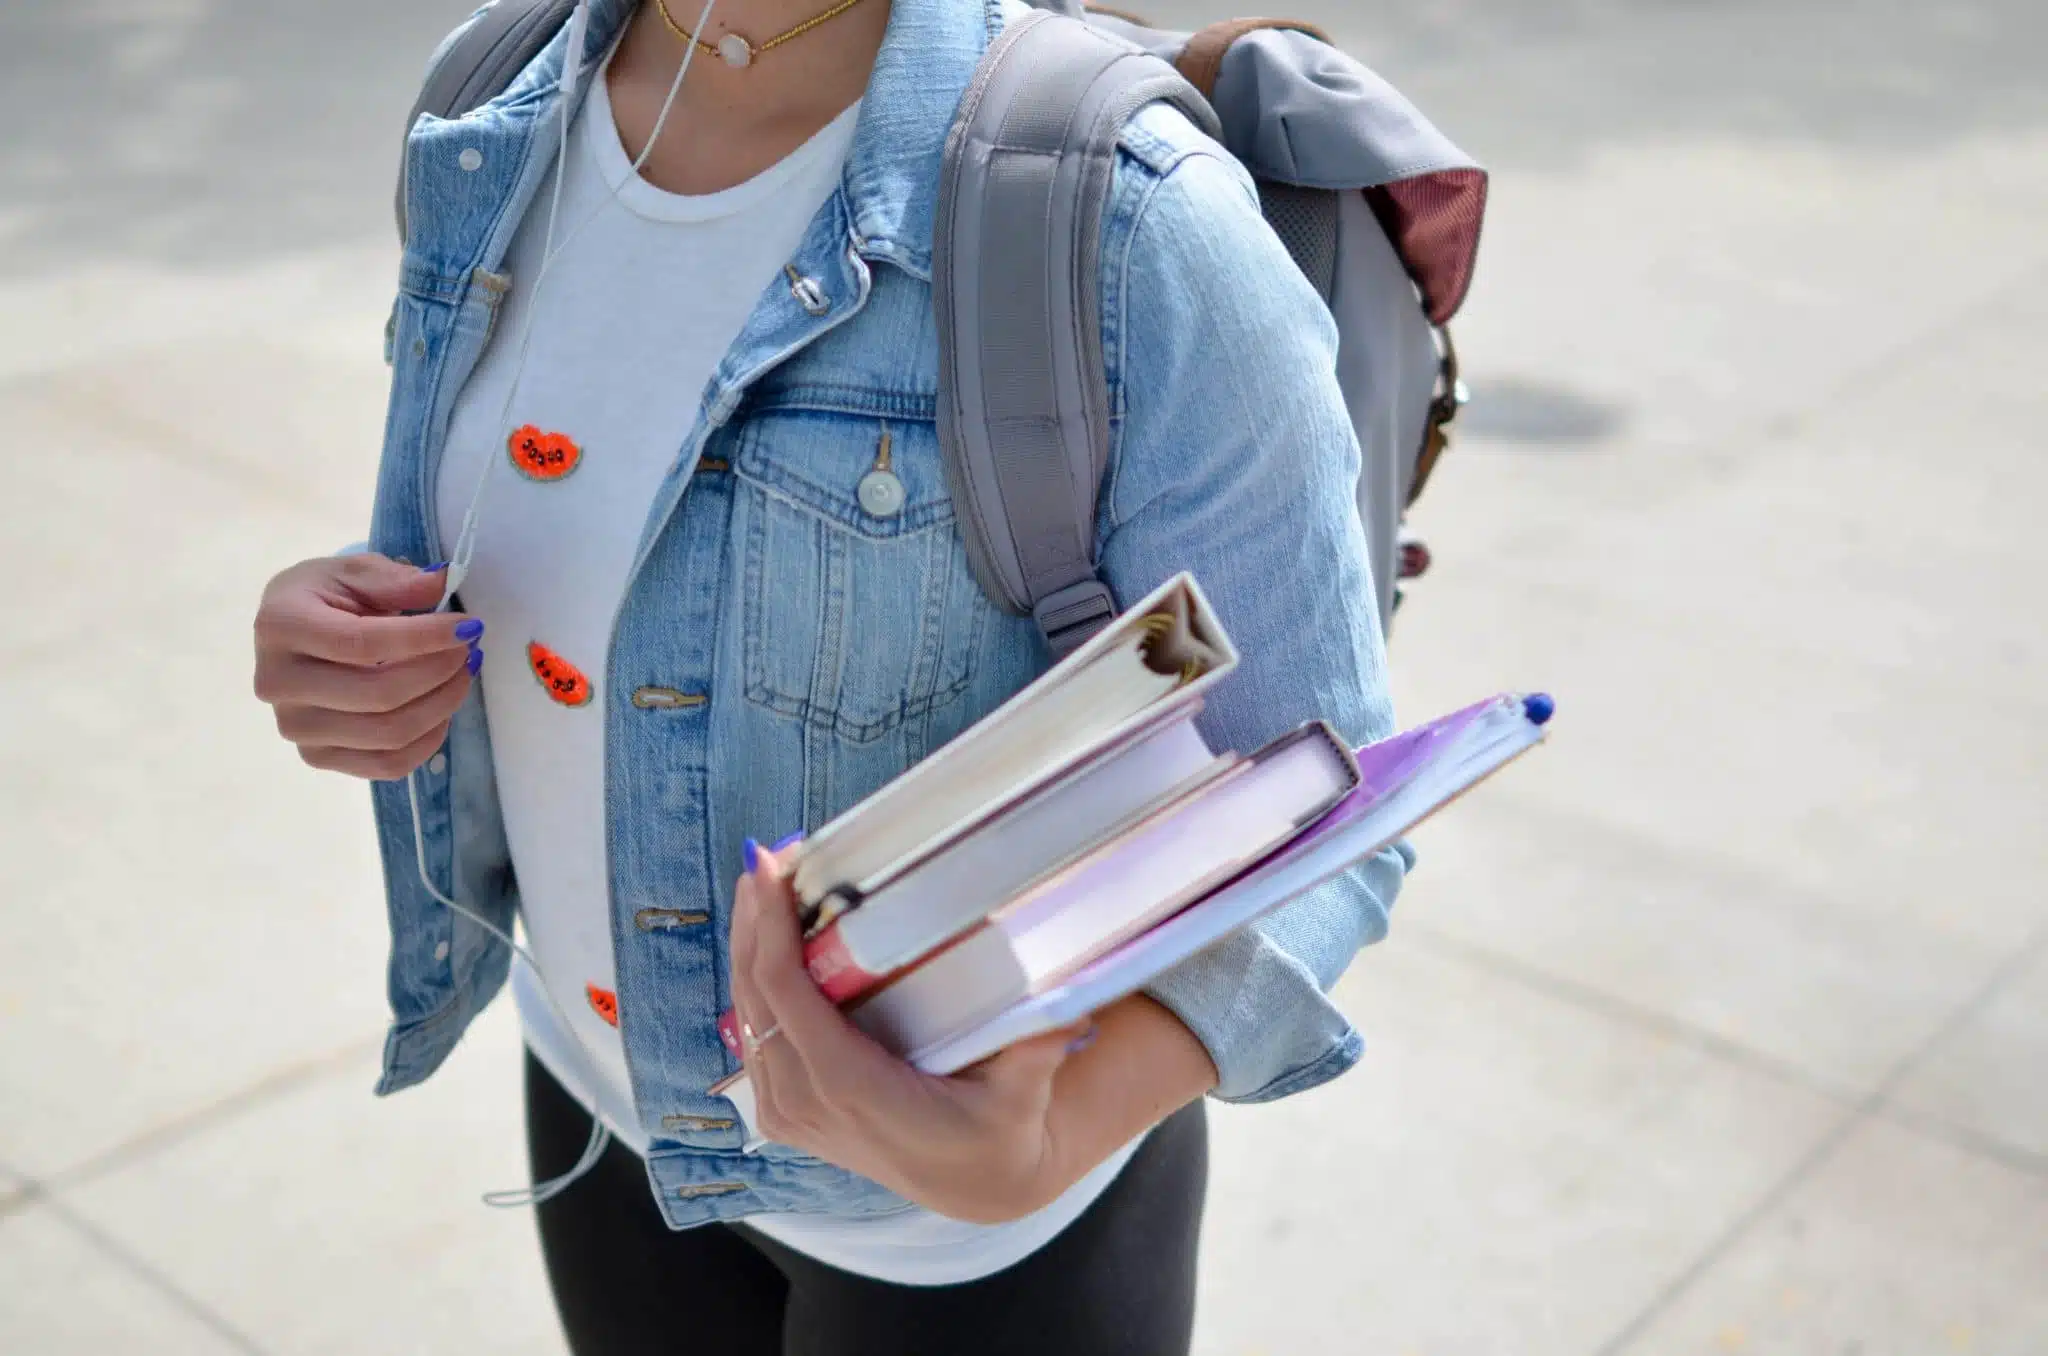 University of the People student carrying social studies books